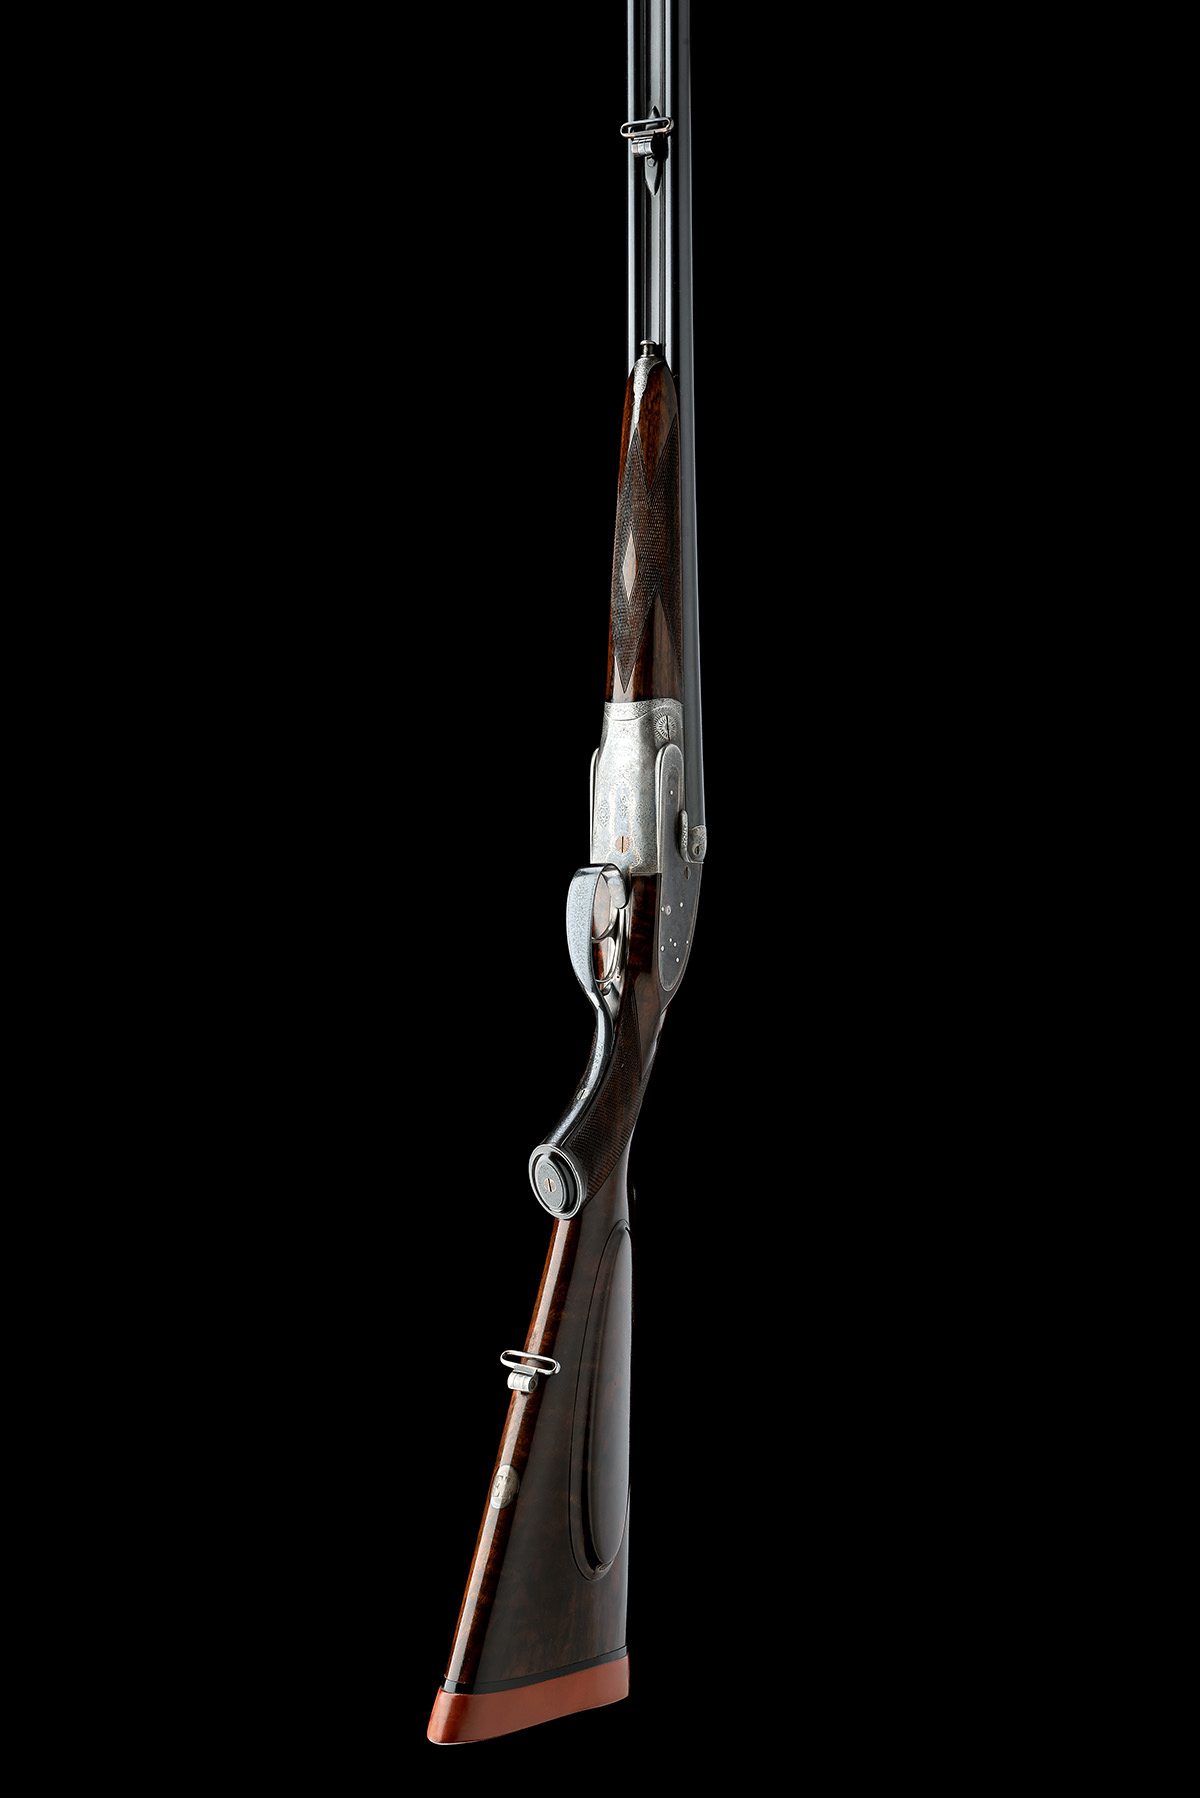 J. PURDEY & SONS A .303 NITRO EXPRESS SELF-OPENING SIDELOCK EJECTOR DOUBLE RIFLE, serial no. - Image 20 of 23